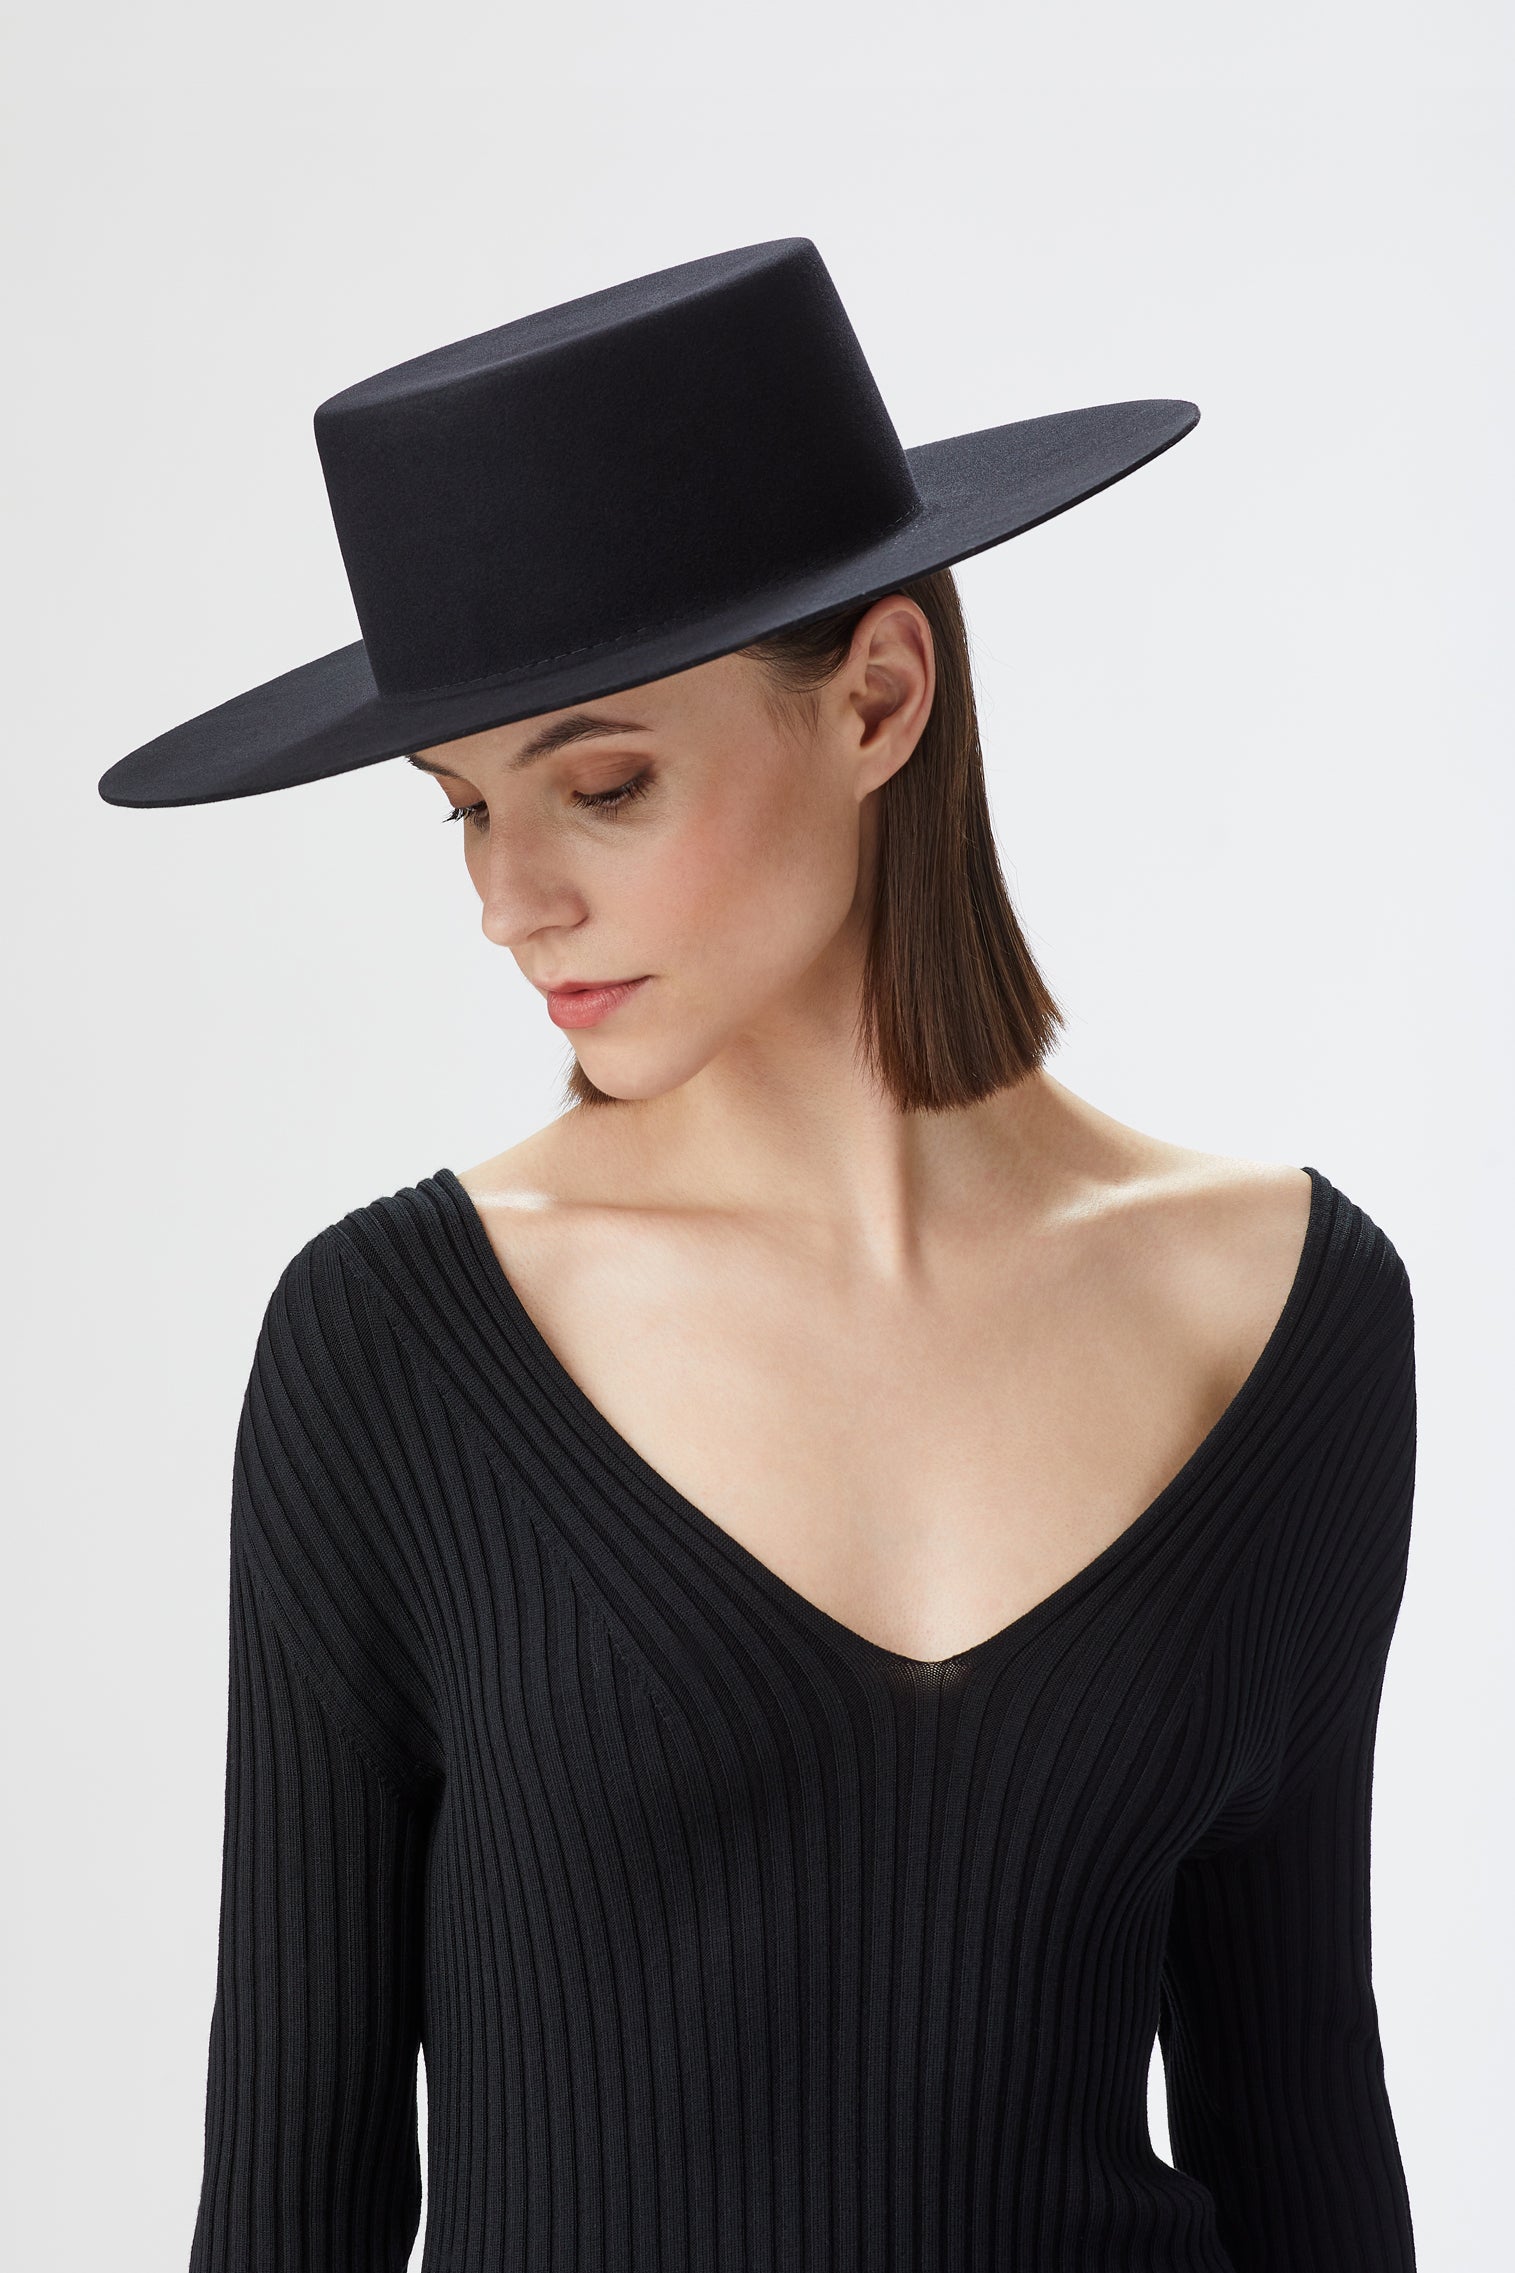 The Vicenzo - Women's Fedoras, Trilbies & Cloches - Lock & Co. Hatters London UK